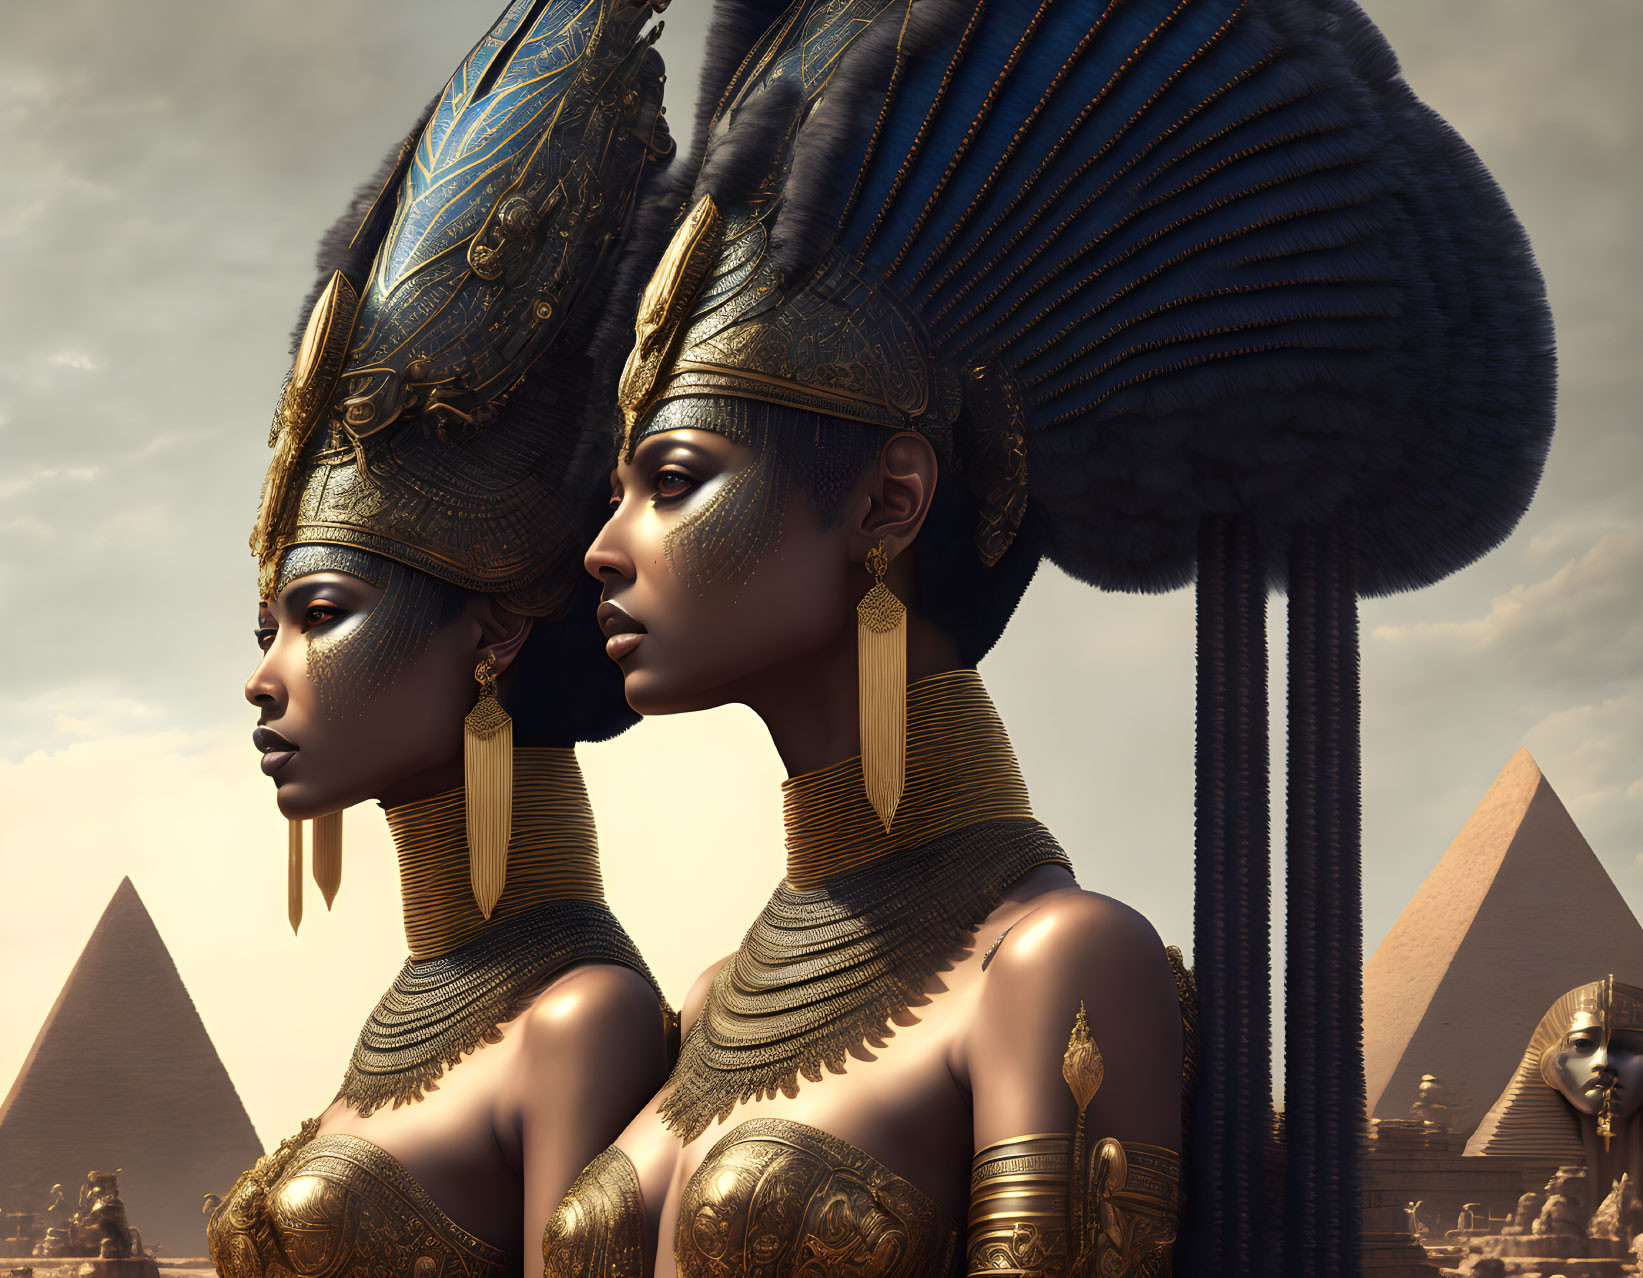 Regal individuals in Egyptian attire with pyramids background